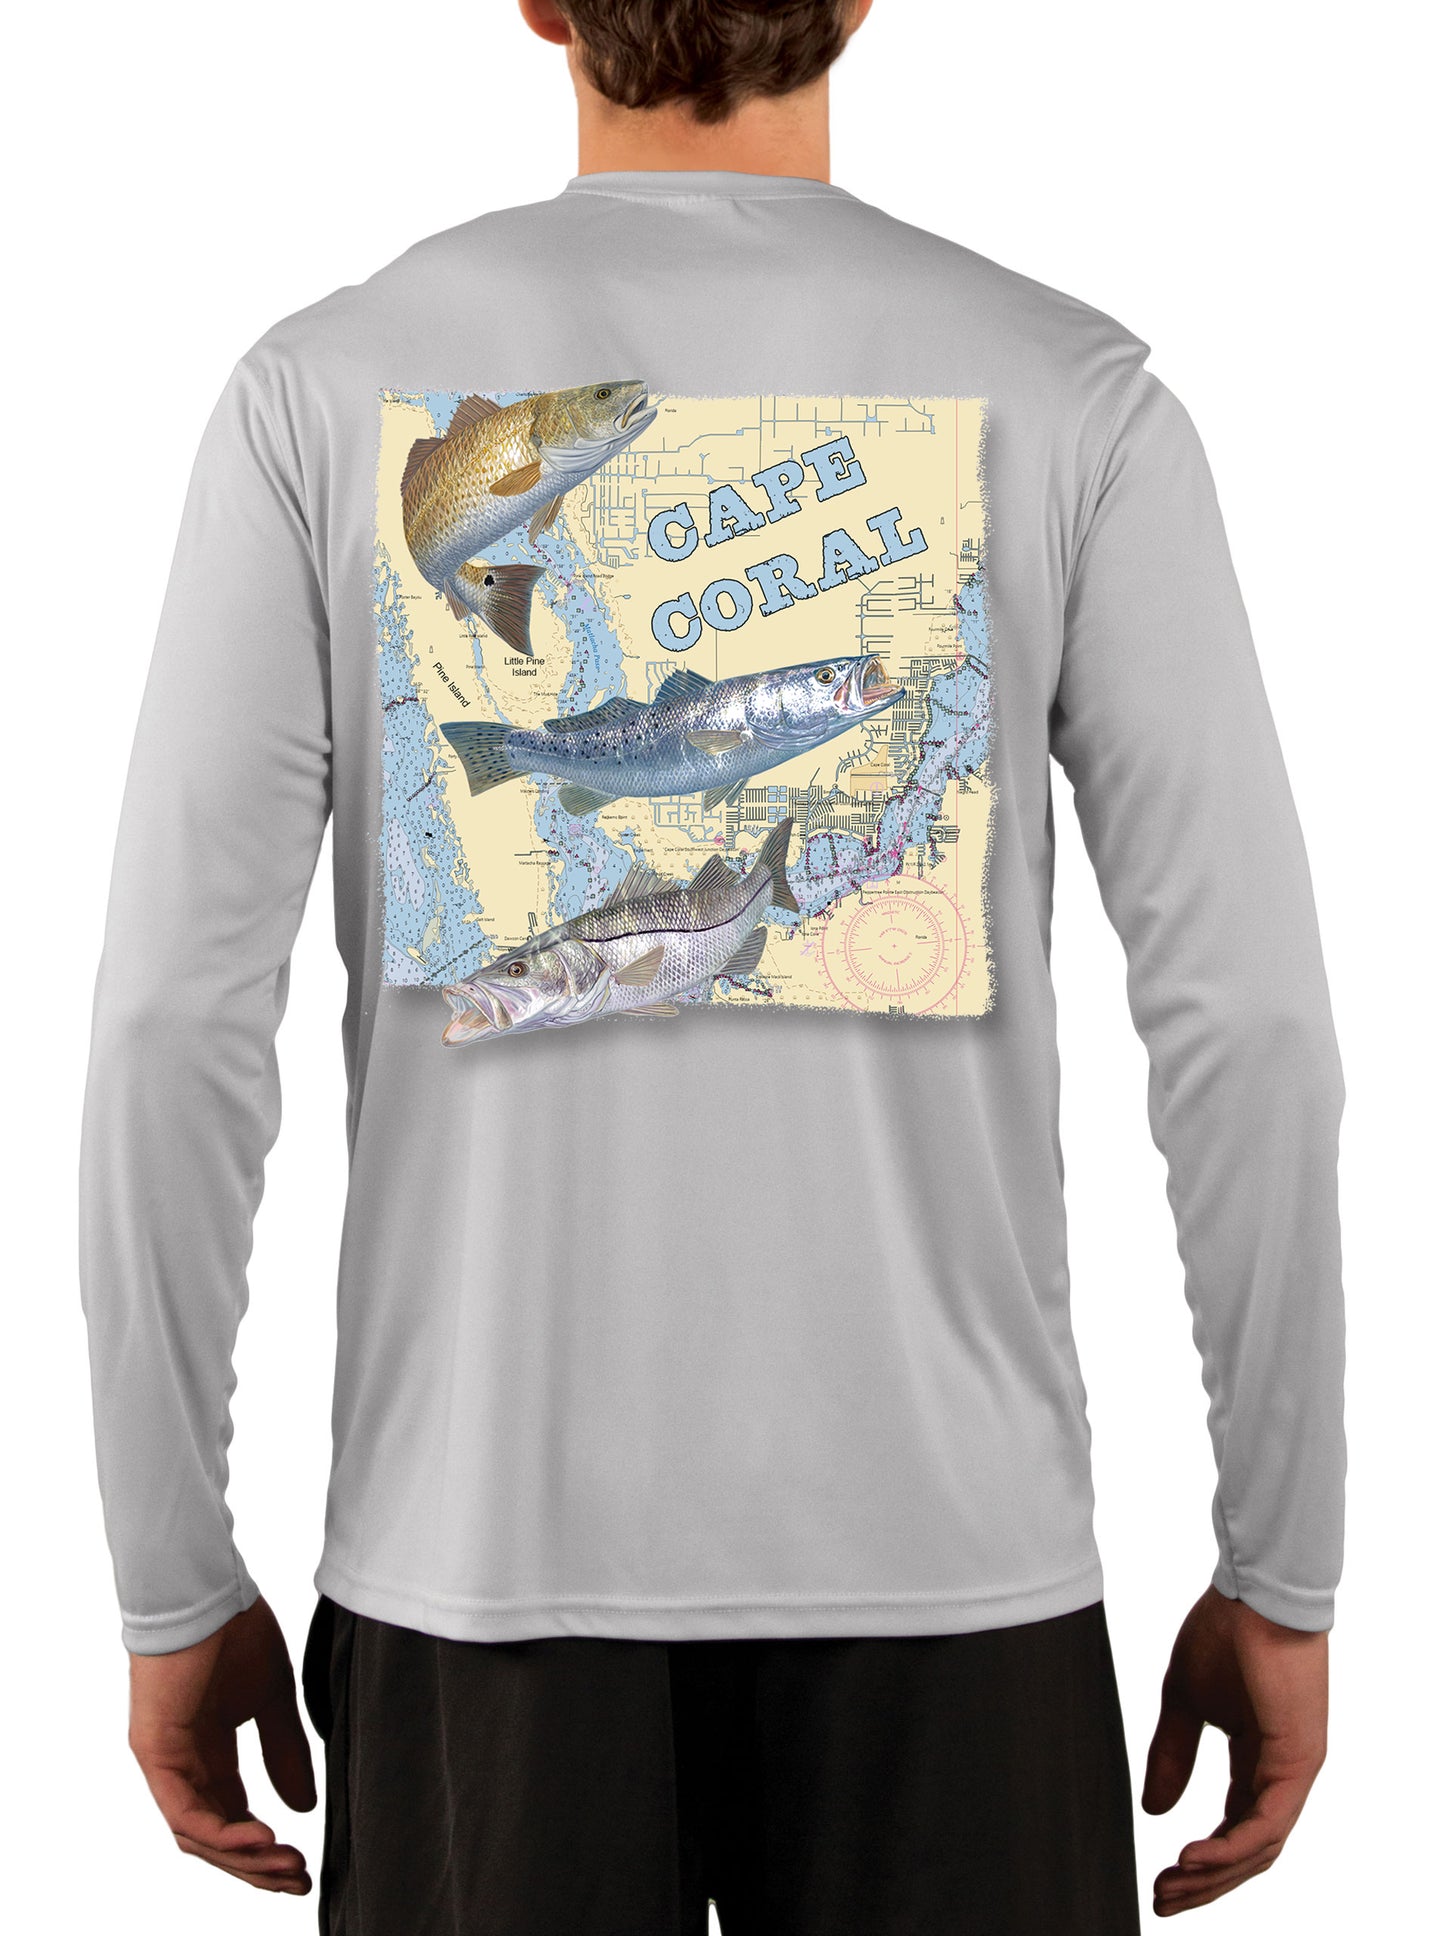 Cape Coral Florida Fishing Shirts for Men Redfish Speckled Sea Trout Snook Red Drum Seatrout 3XL / Pearl Gray